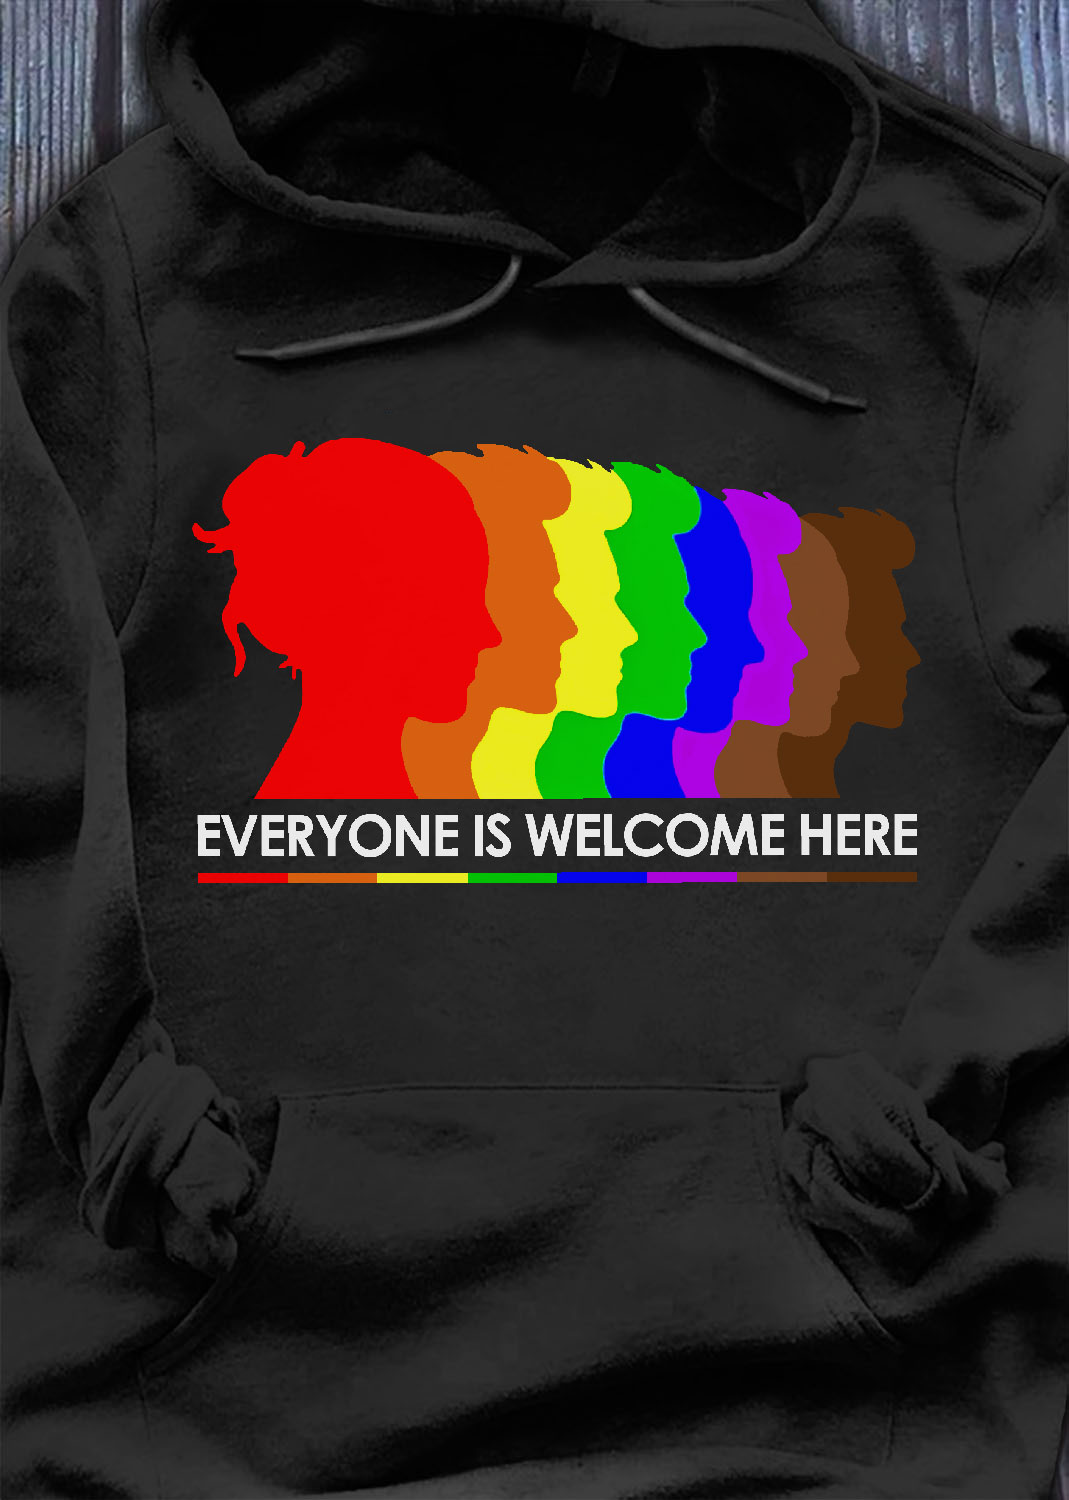 Everyone is welcome here - LGBT community